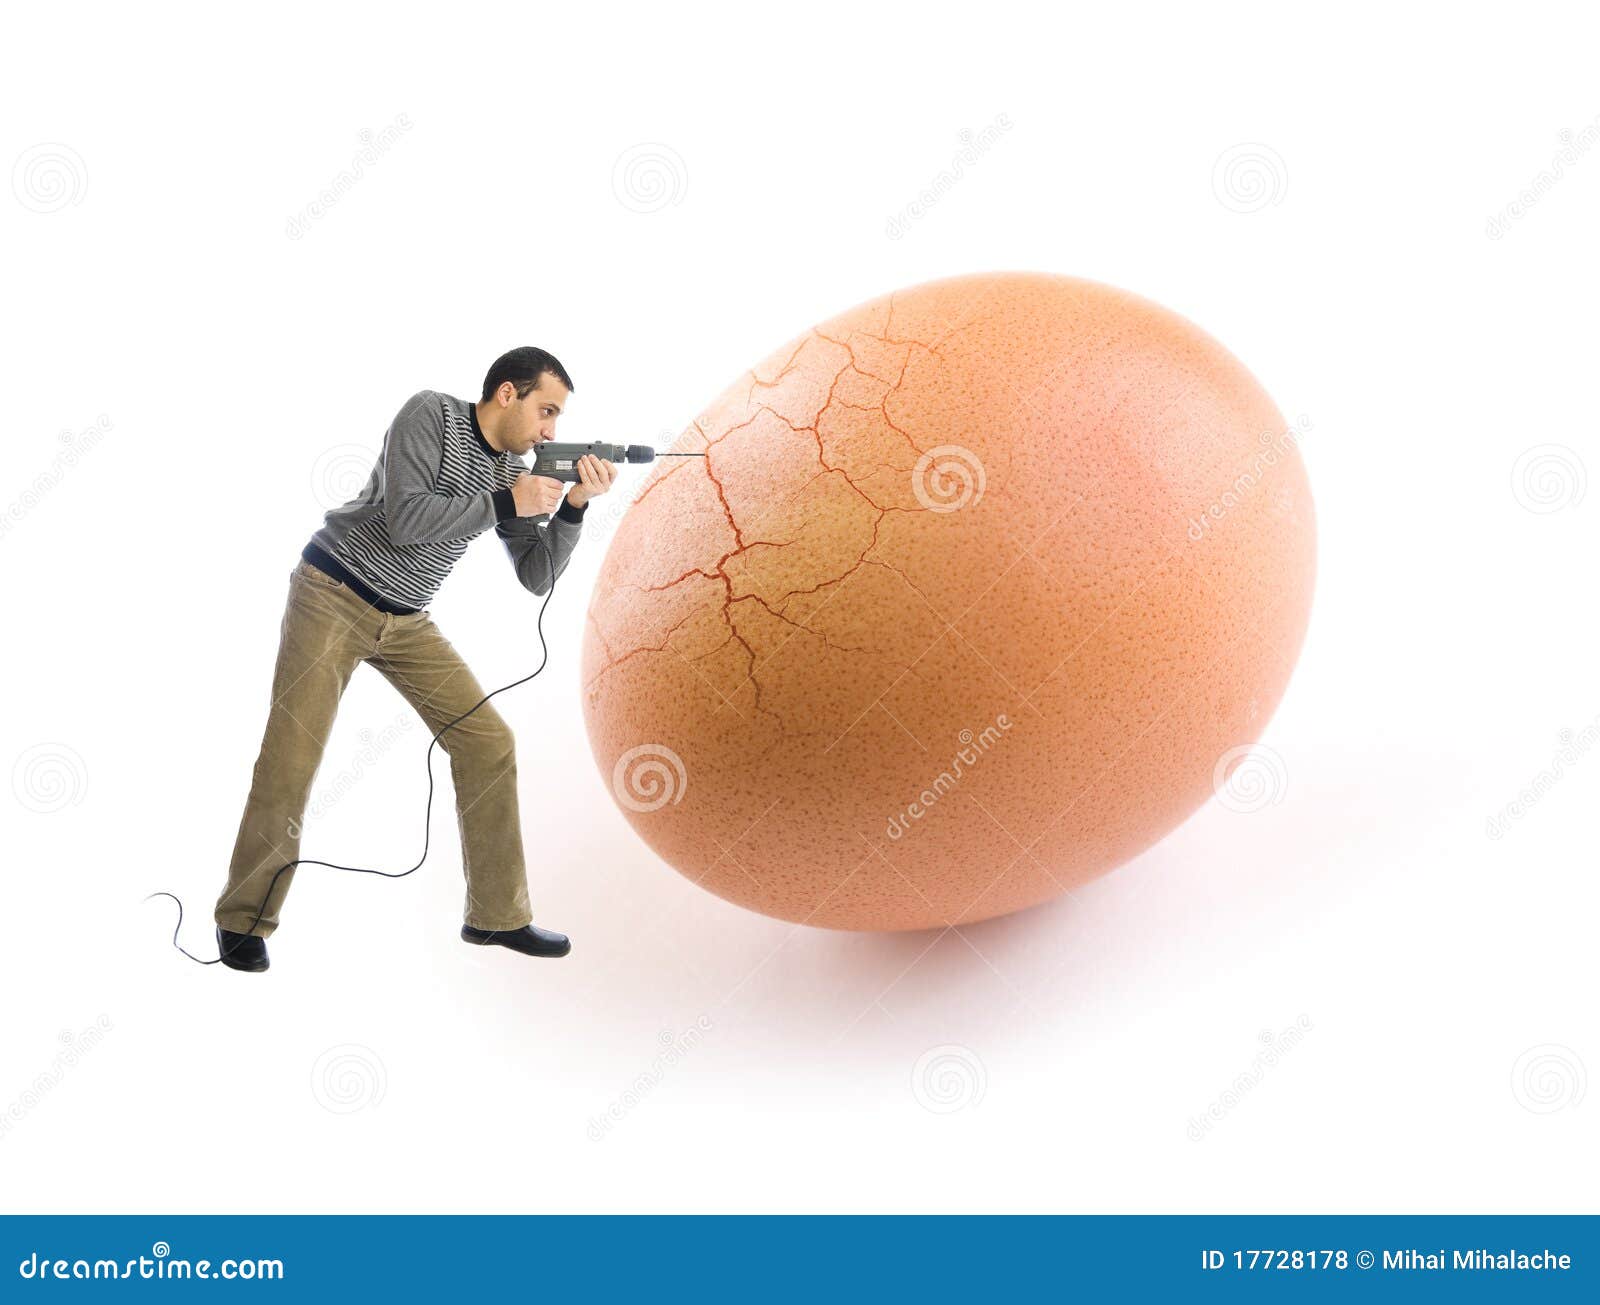 young man cracking an egg using a drill tool